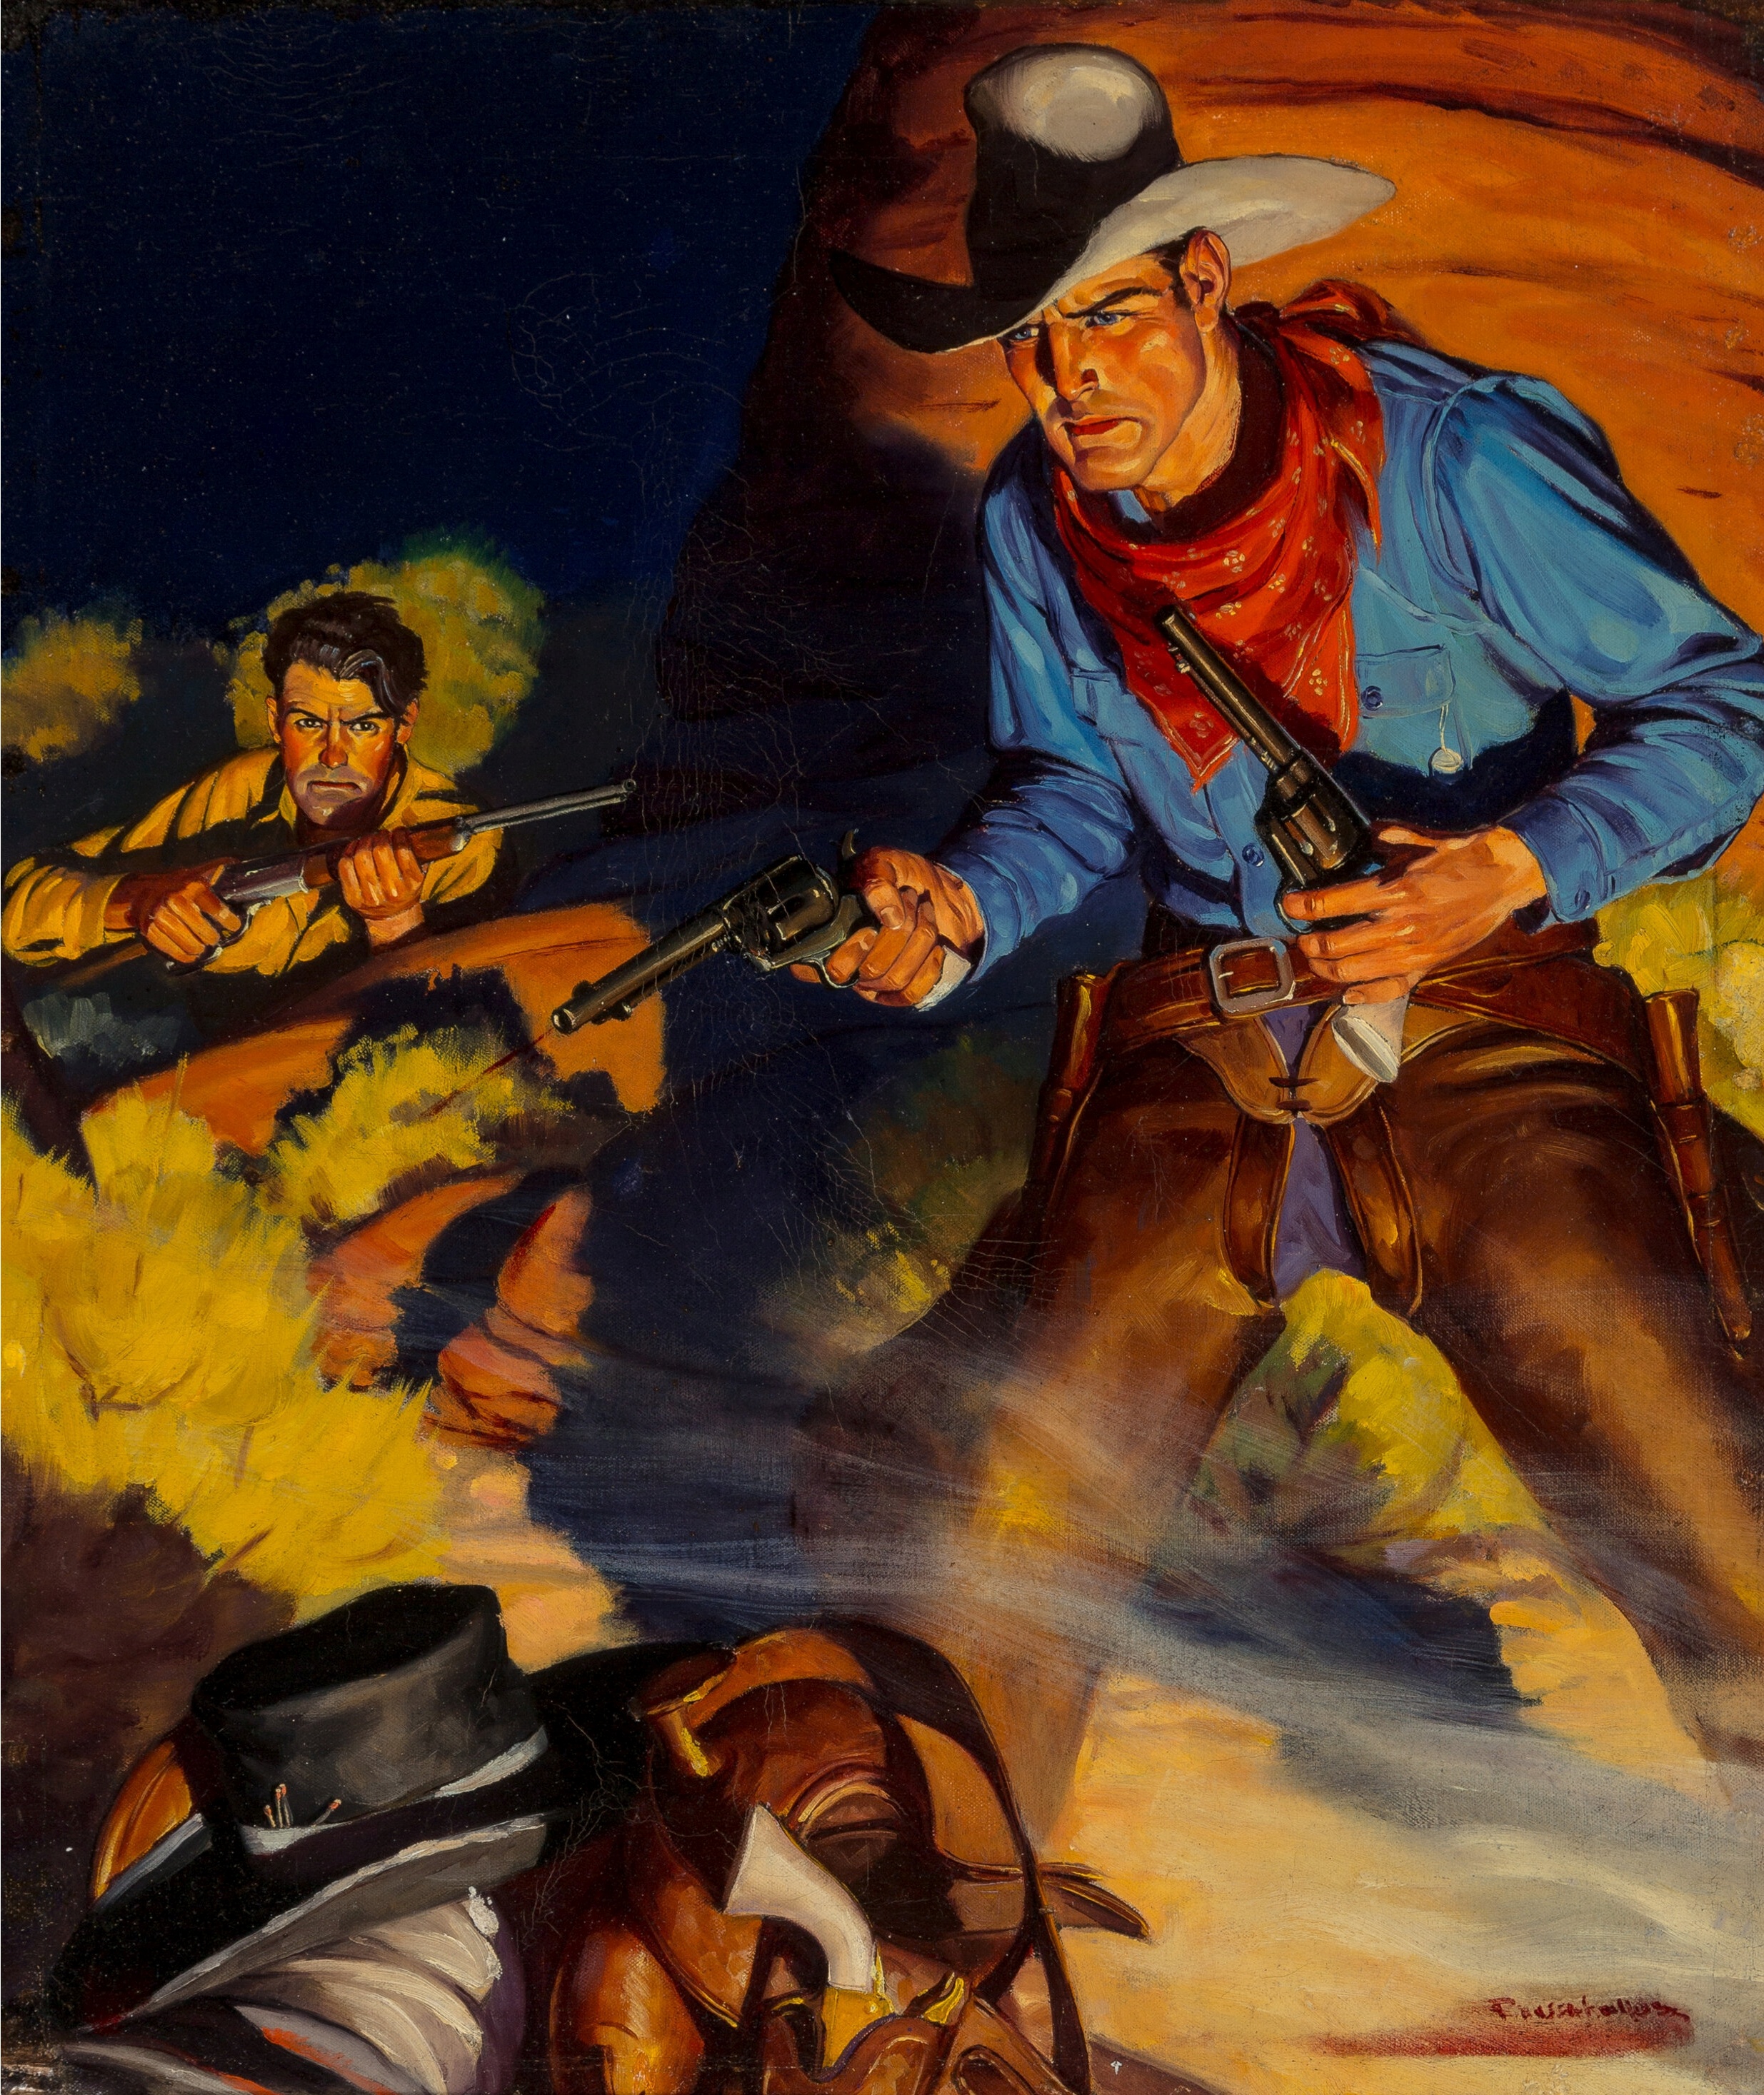 Gold Plated Six Guns, Wild West Weekly magazine cover, October 24, 1936